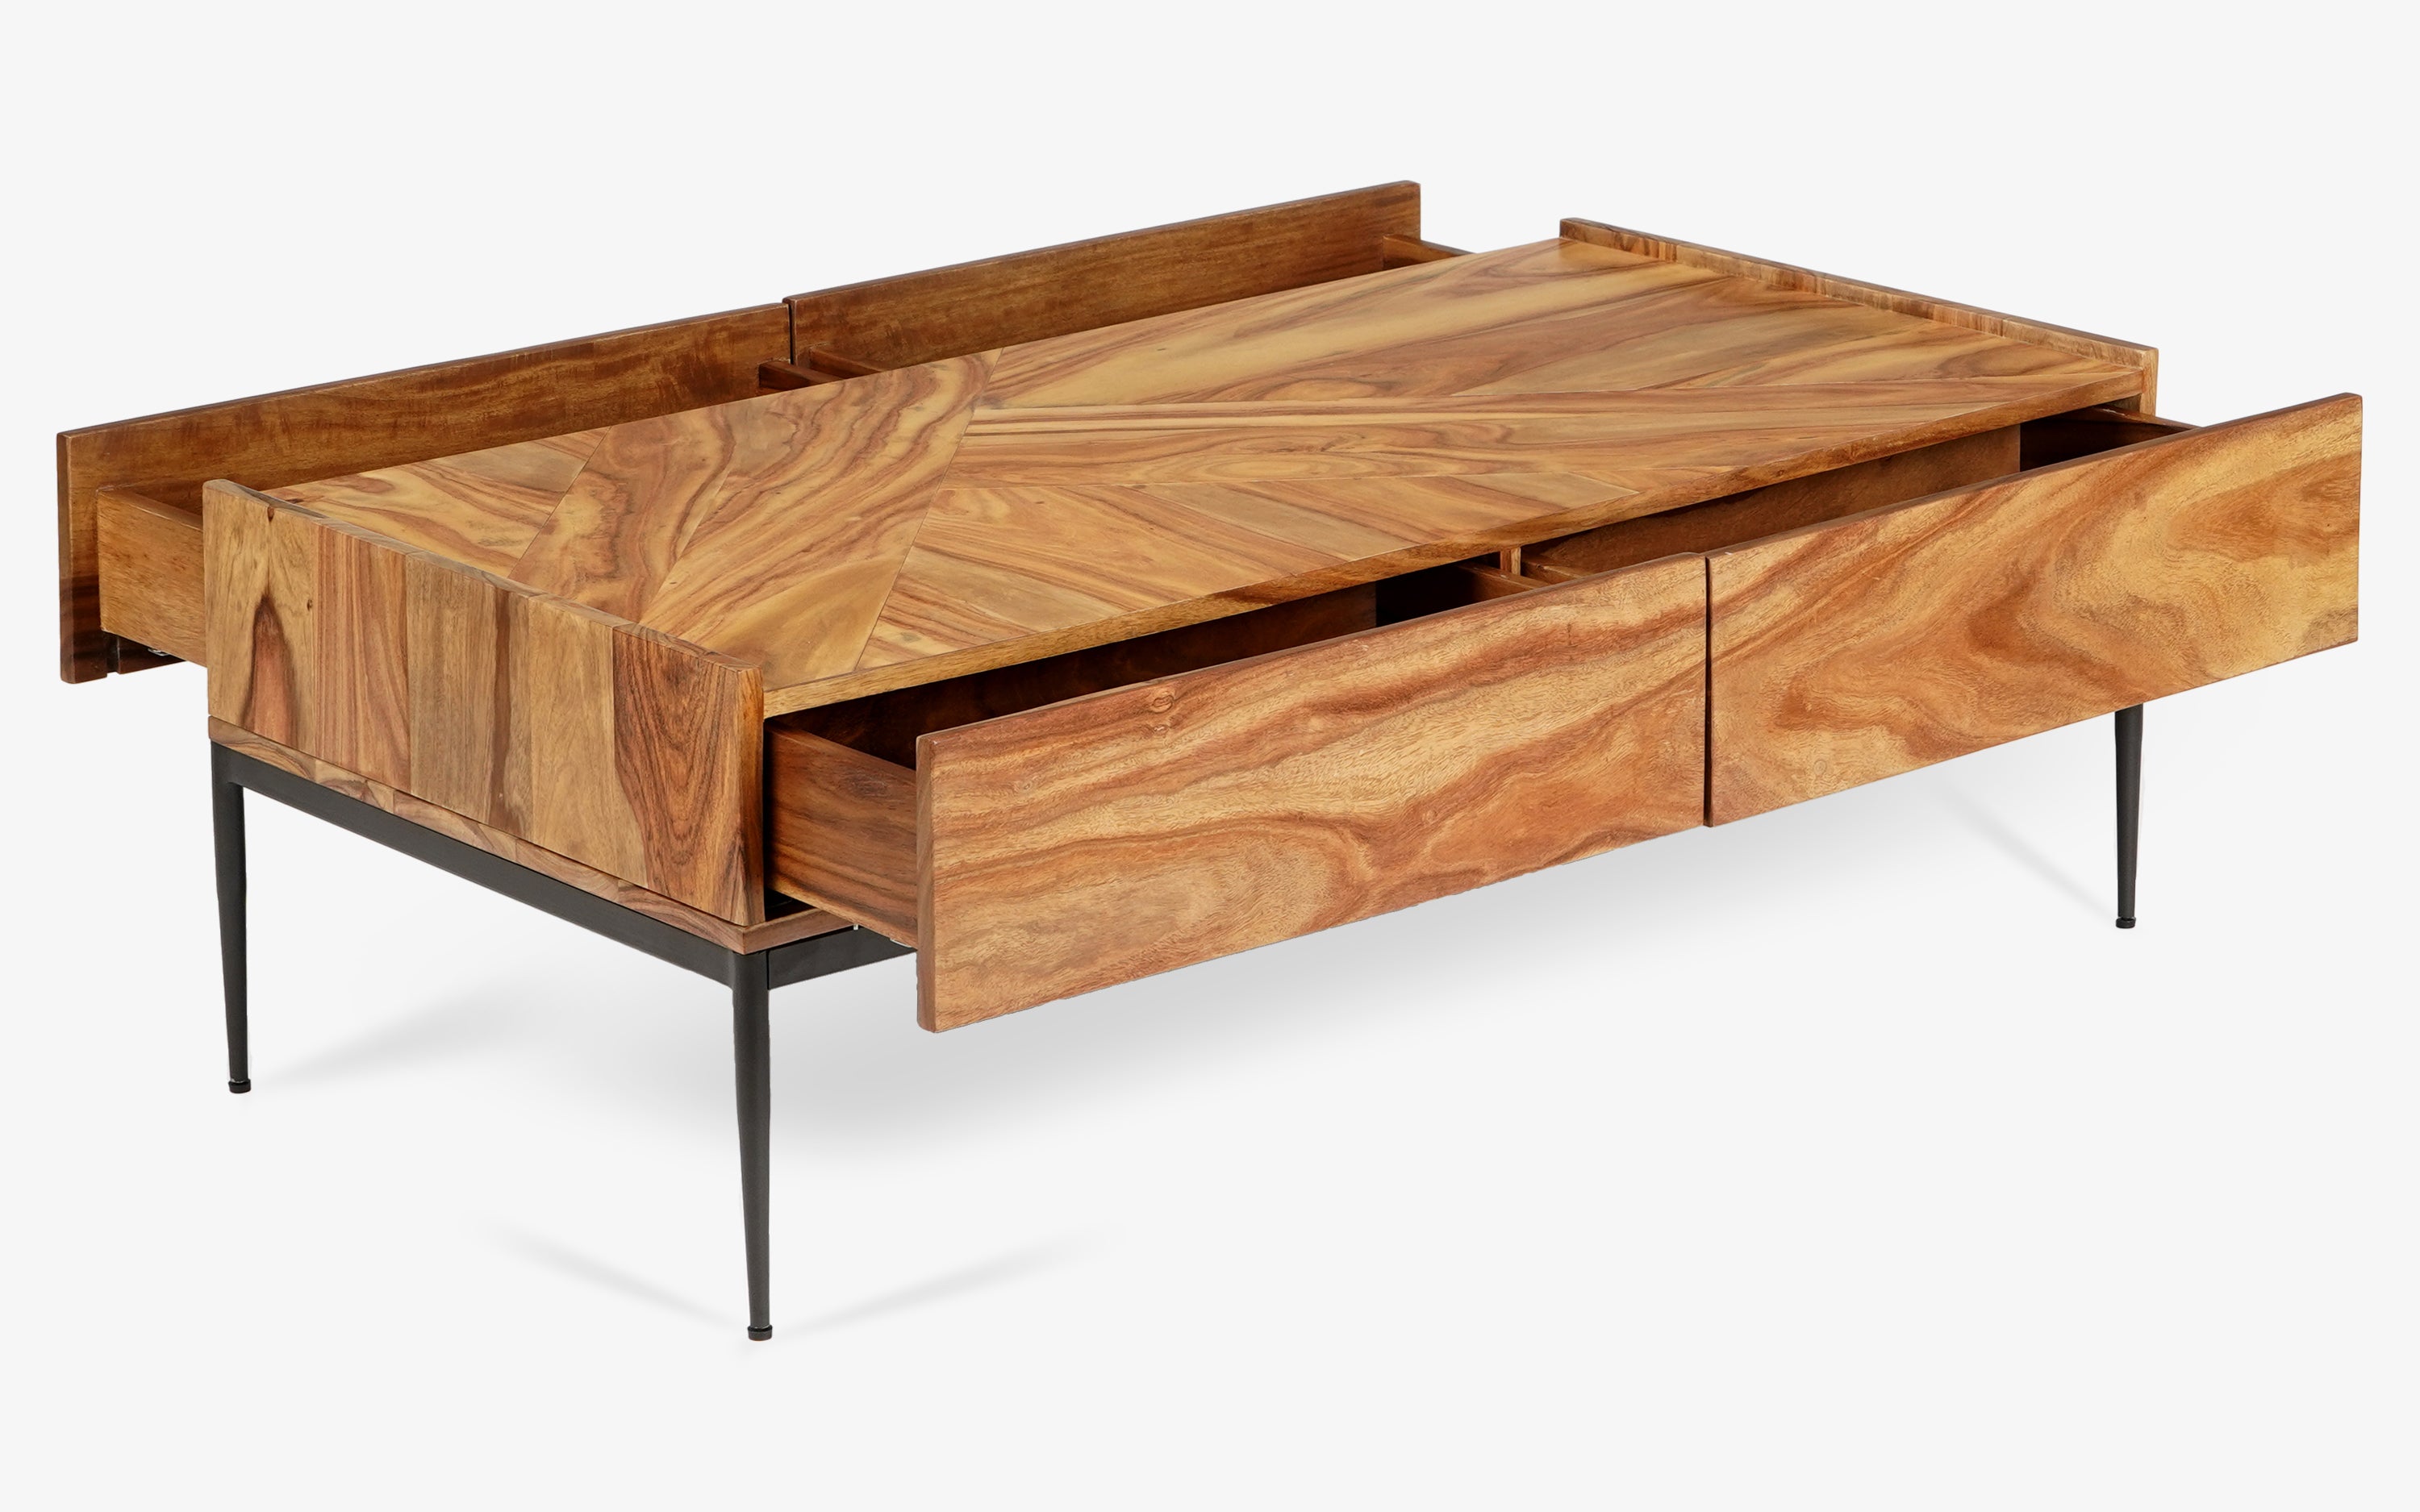 Eco Rectangular Coffee table with Drawer storage . Wooden Furniture - Orange Tree Home